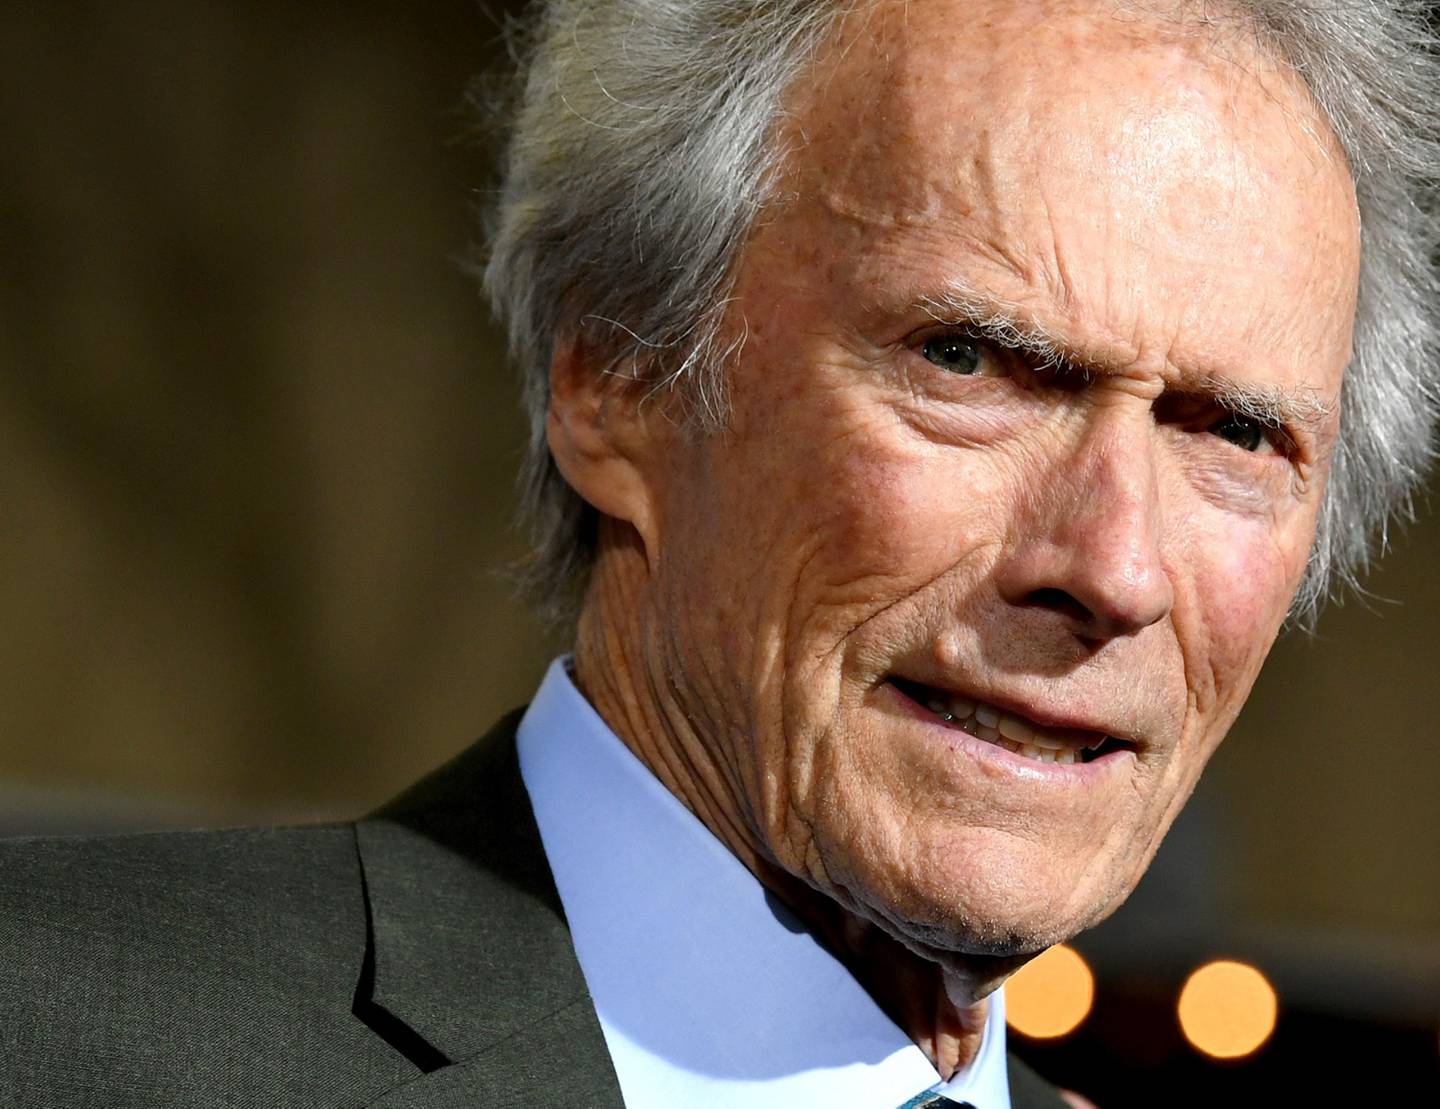 LOS ANGELES, CA - DECEMBER 10: Clint Eastwood arrives at the premiere of Warner Bros. Pictures' "The Mule" at the Village Theatre on December 10, 2018 in Los Angeles, California.   Kevin Winter/Getty Images/AFP
== FOR NEWSPAPERS, INTERNET, TELCOS & TELEVISION USE ONLY ==